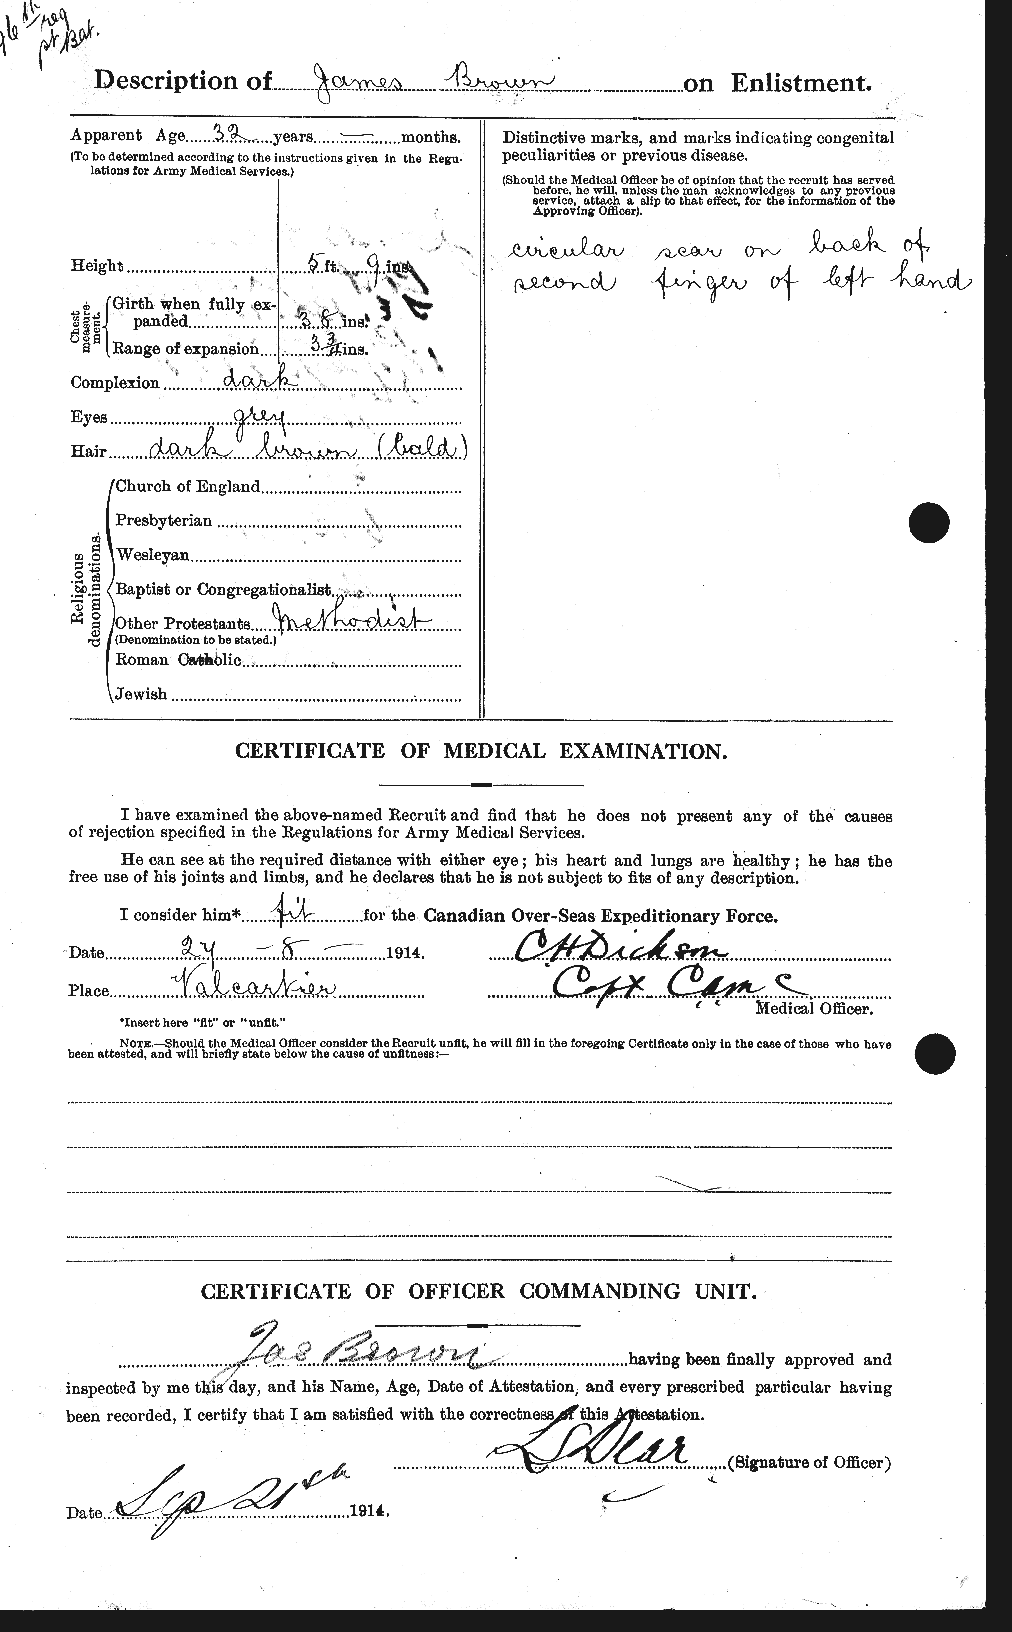 Personnel Records of the First World War - CEF 265701b